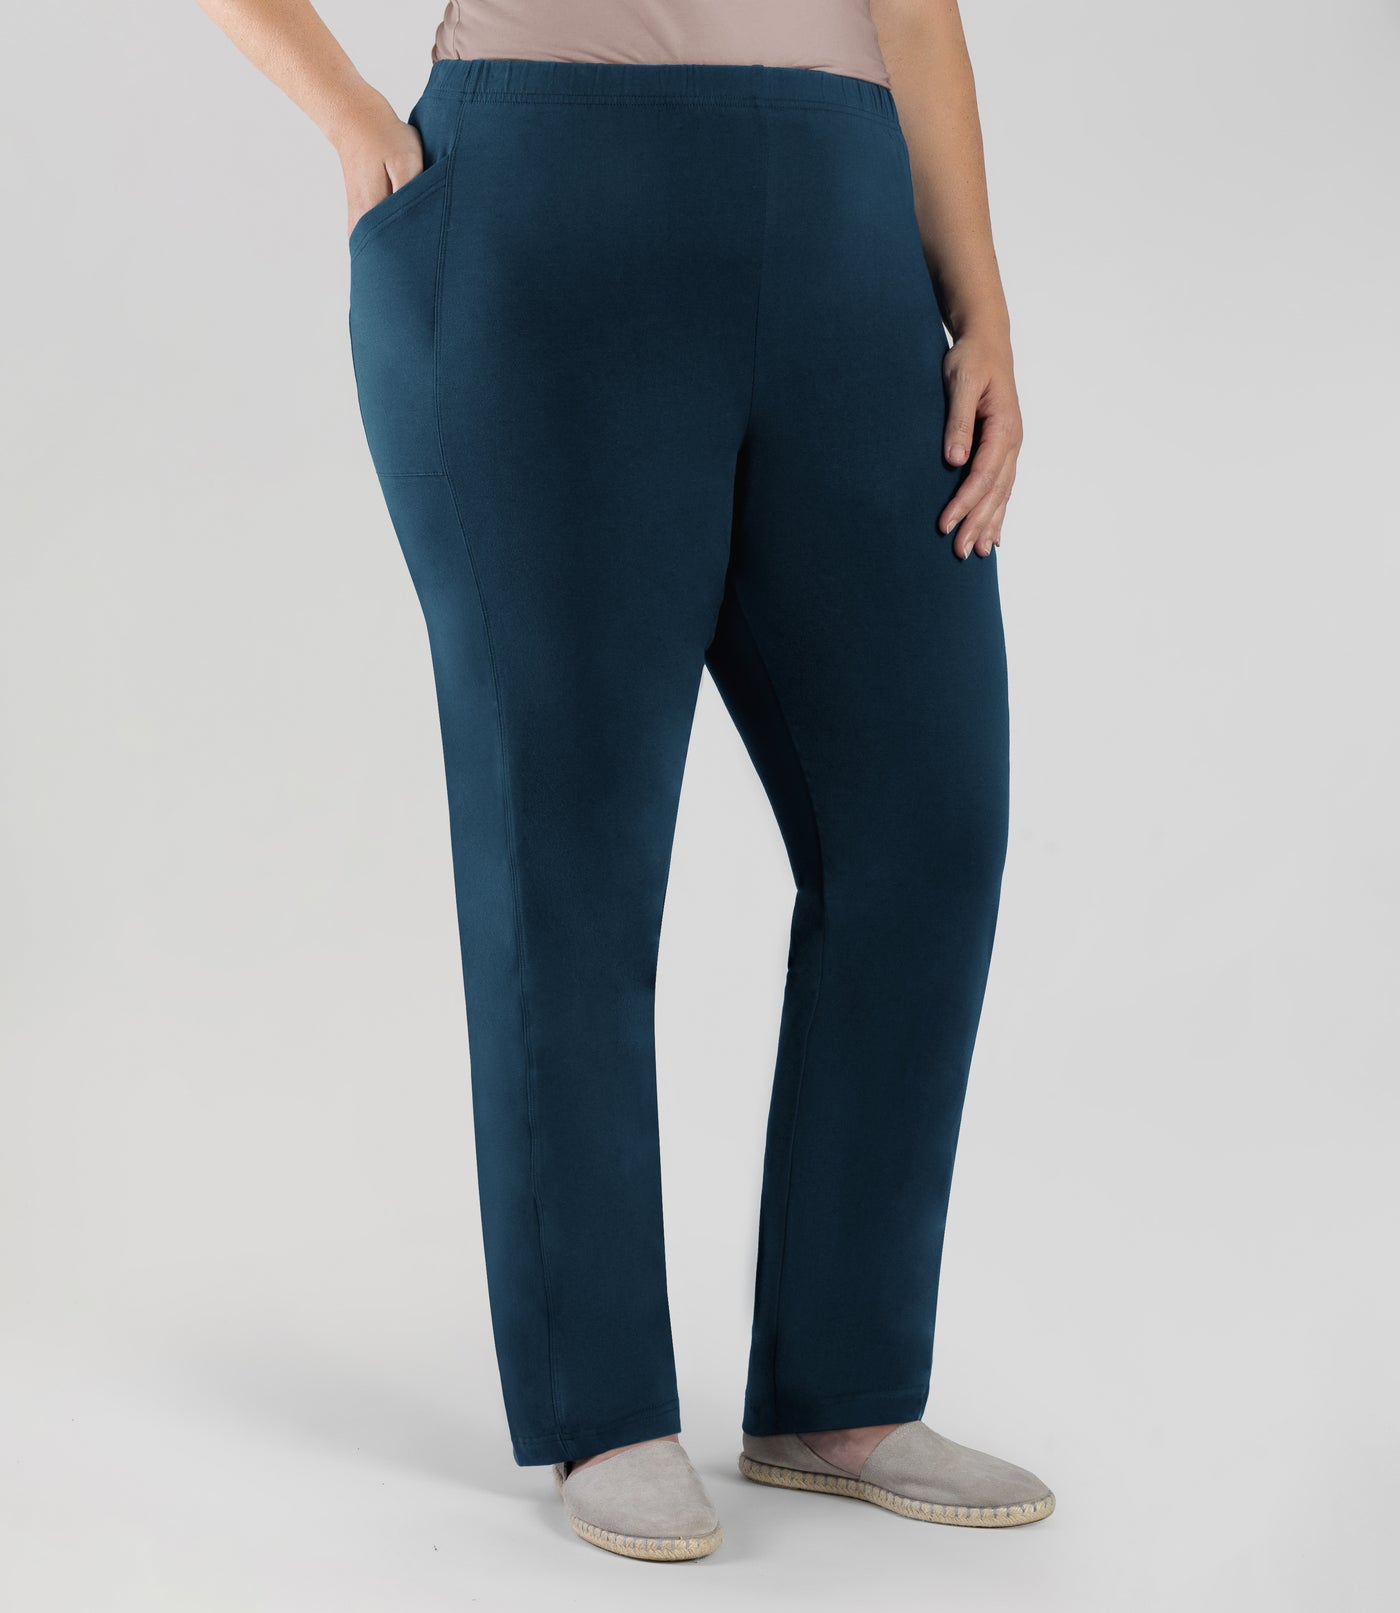 Bottom half of plus sized woman, front side view, wearing JunoActive Tall Stretch Naturals Side Pocket Loose Fit Leggings in color indigo. Bottom hem is at the ankle.